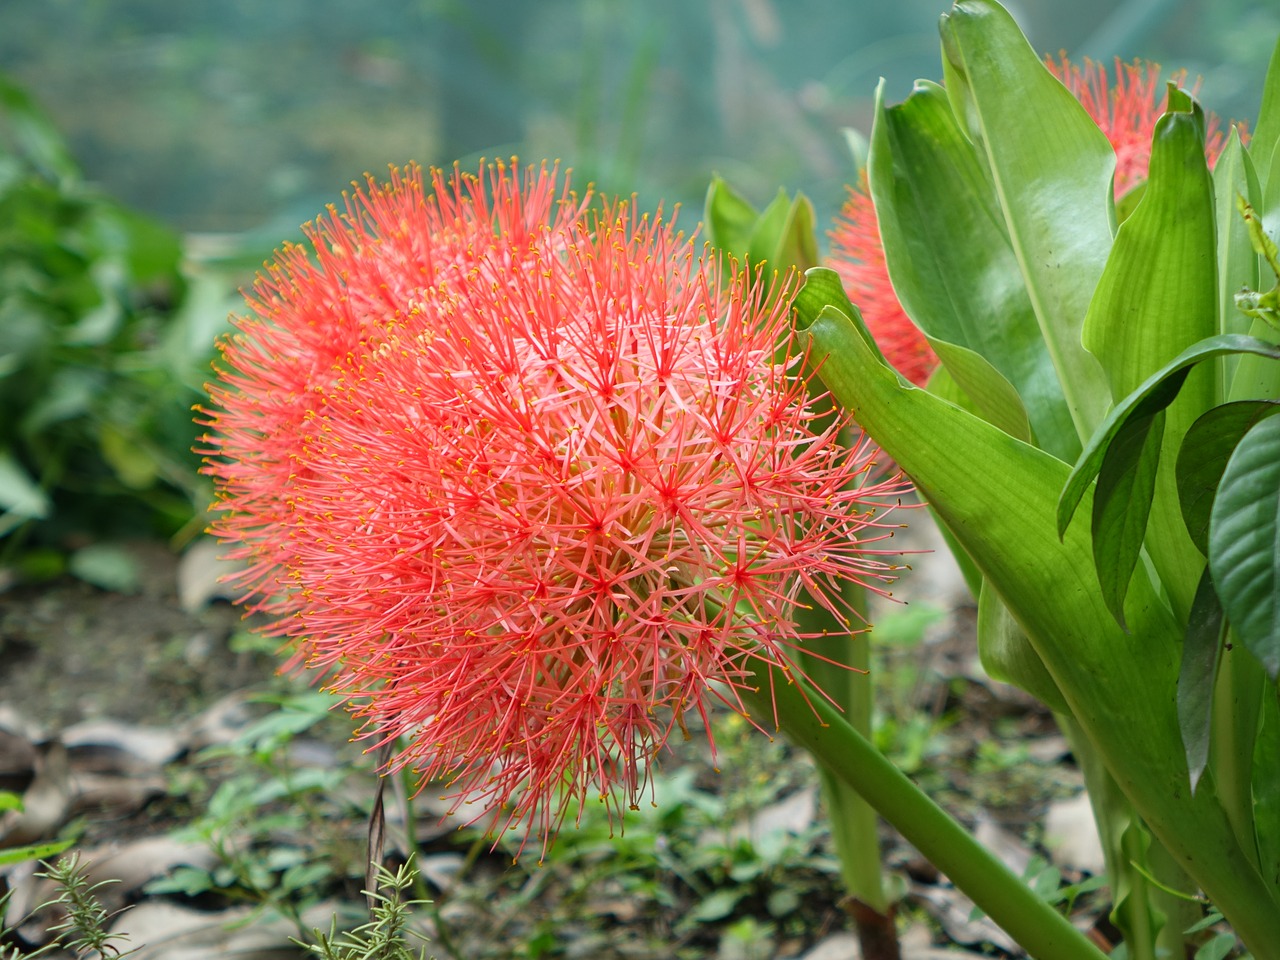 tennis spent blood lily flower free photo